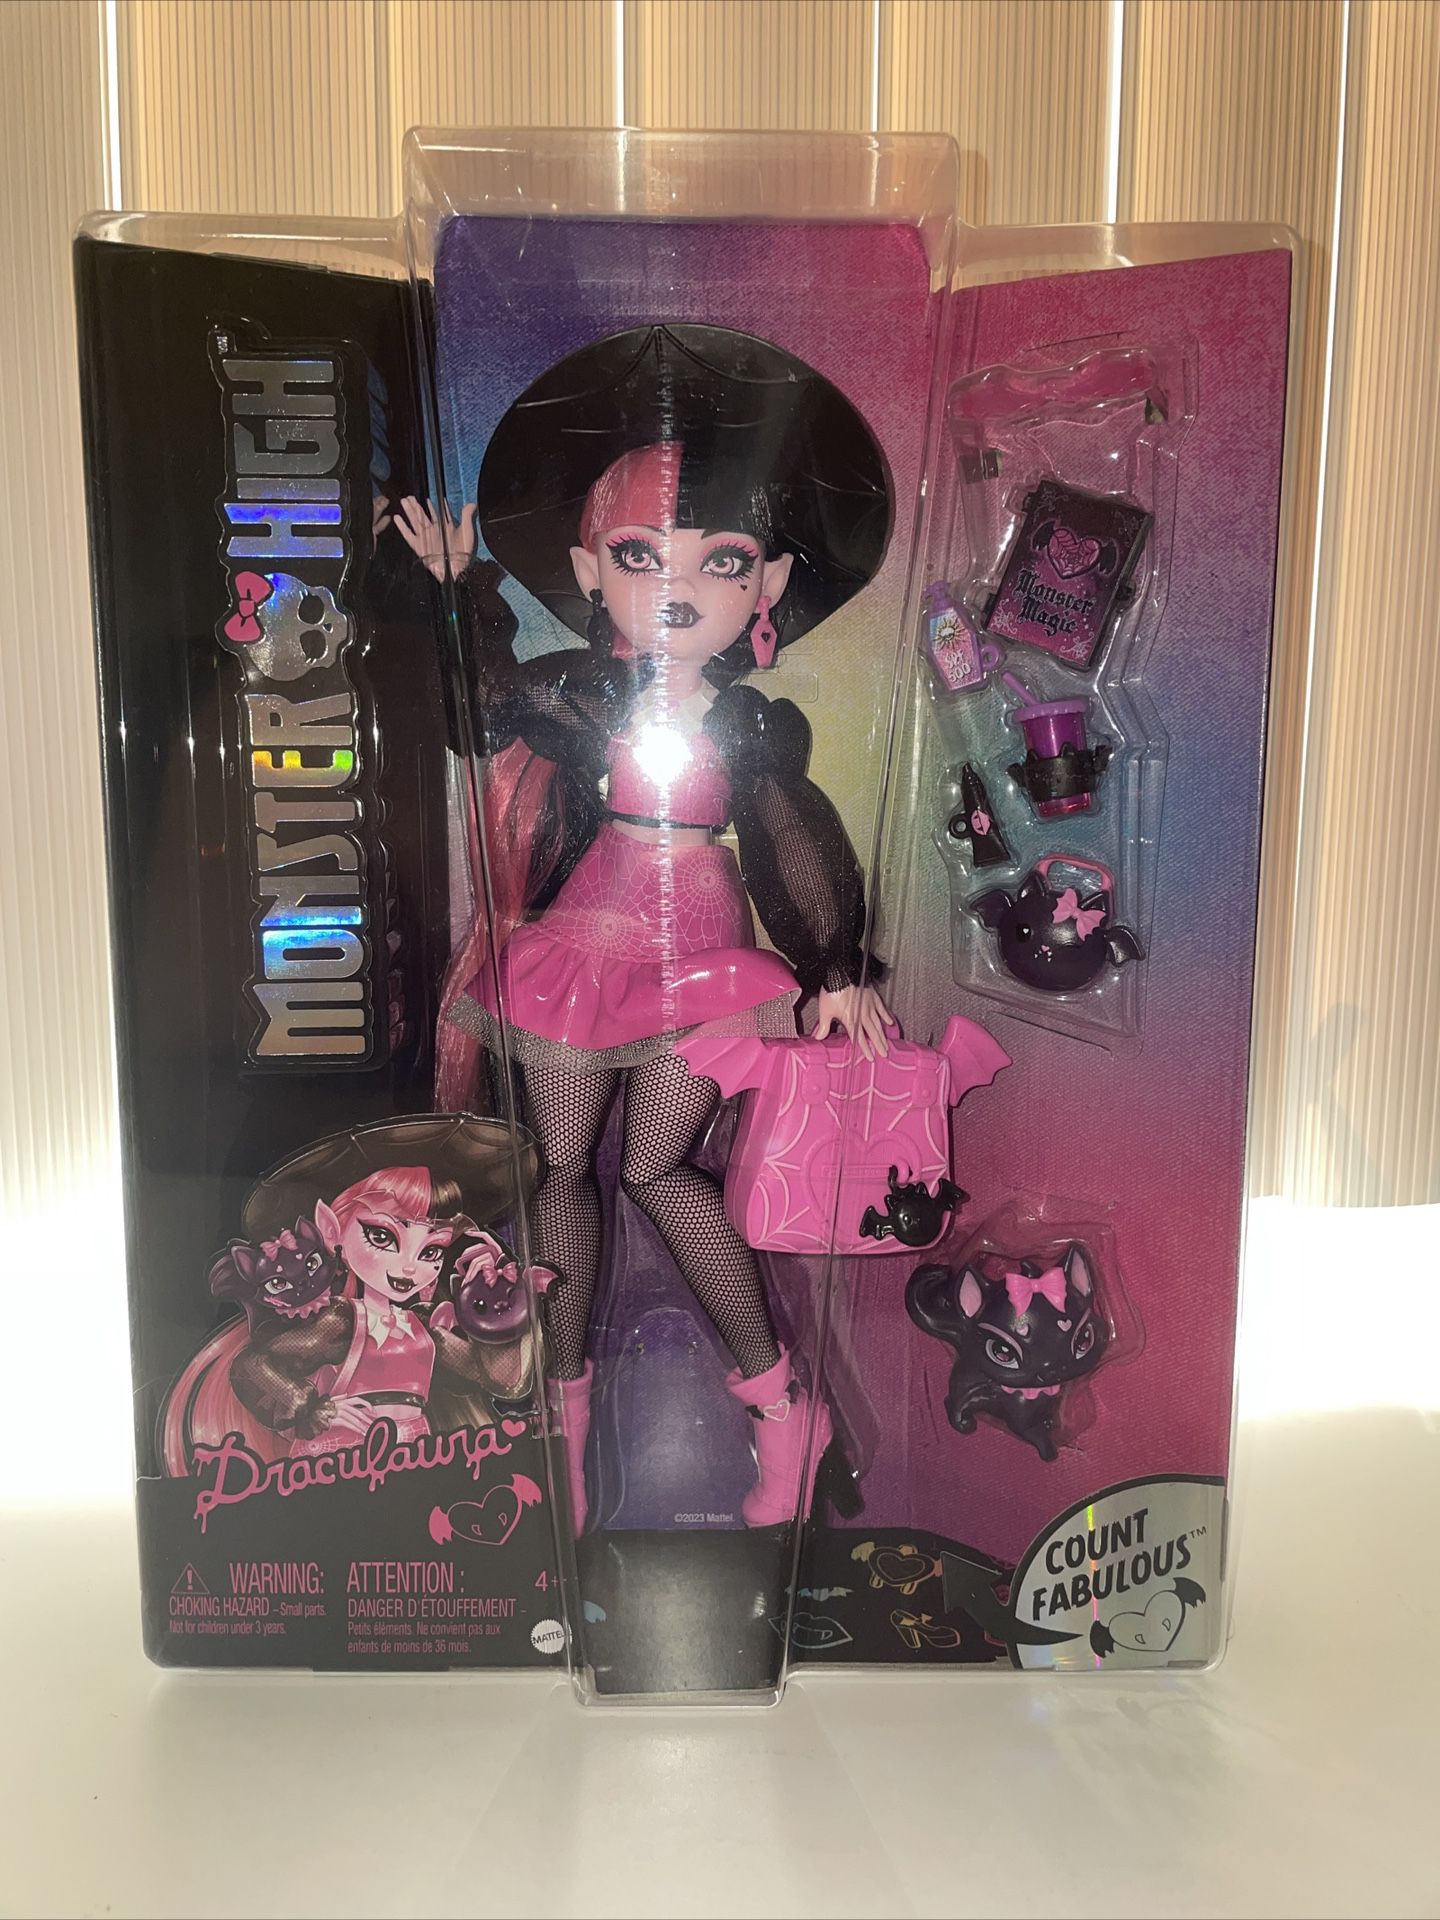 New Monster High Draculaura Doll with Pet Bat-Cat Count Fabulous and Accessories